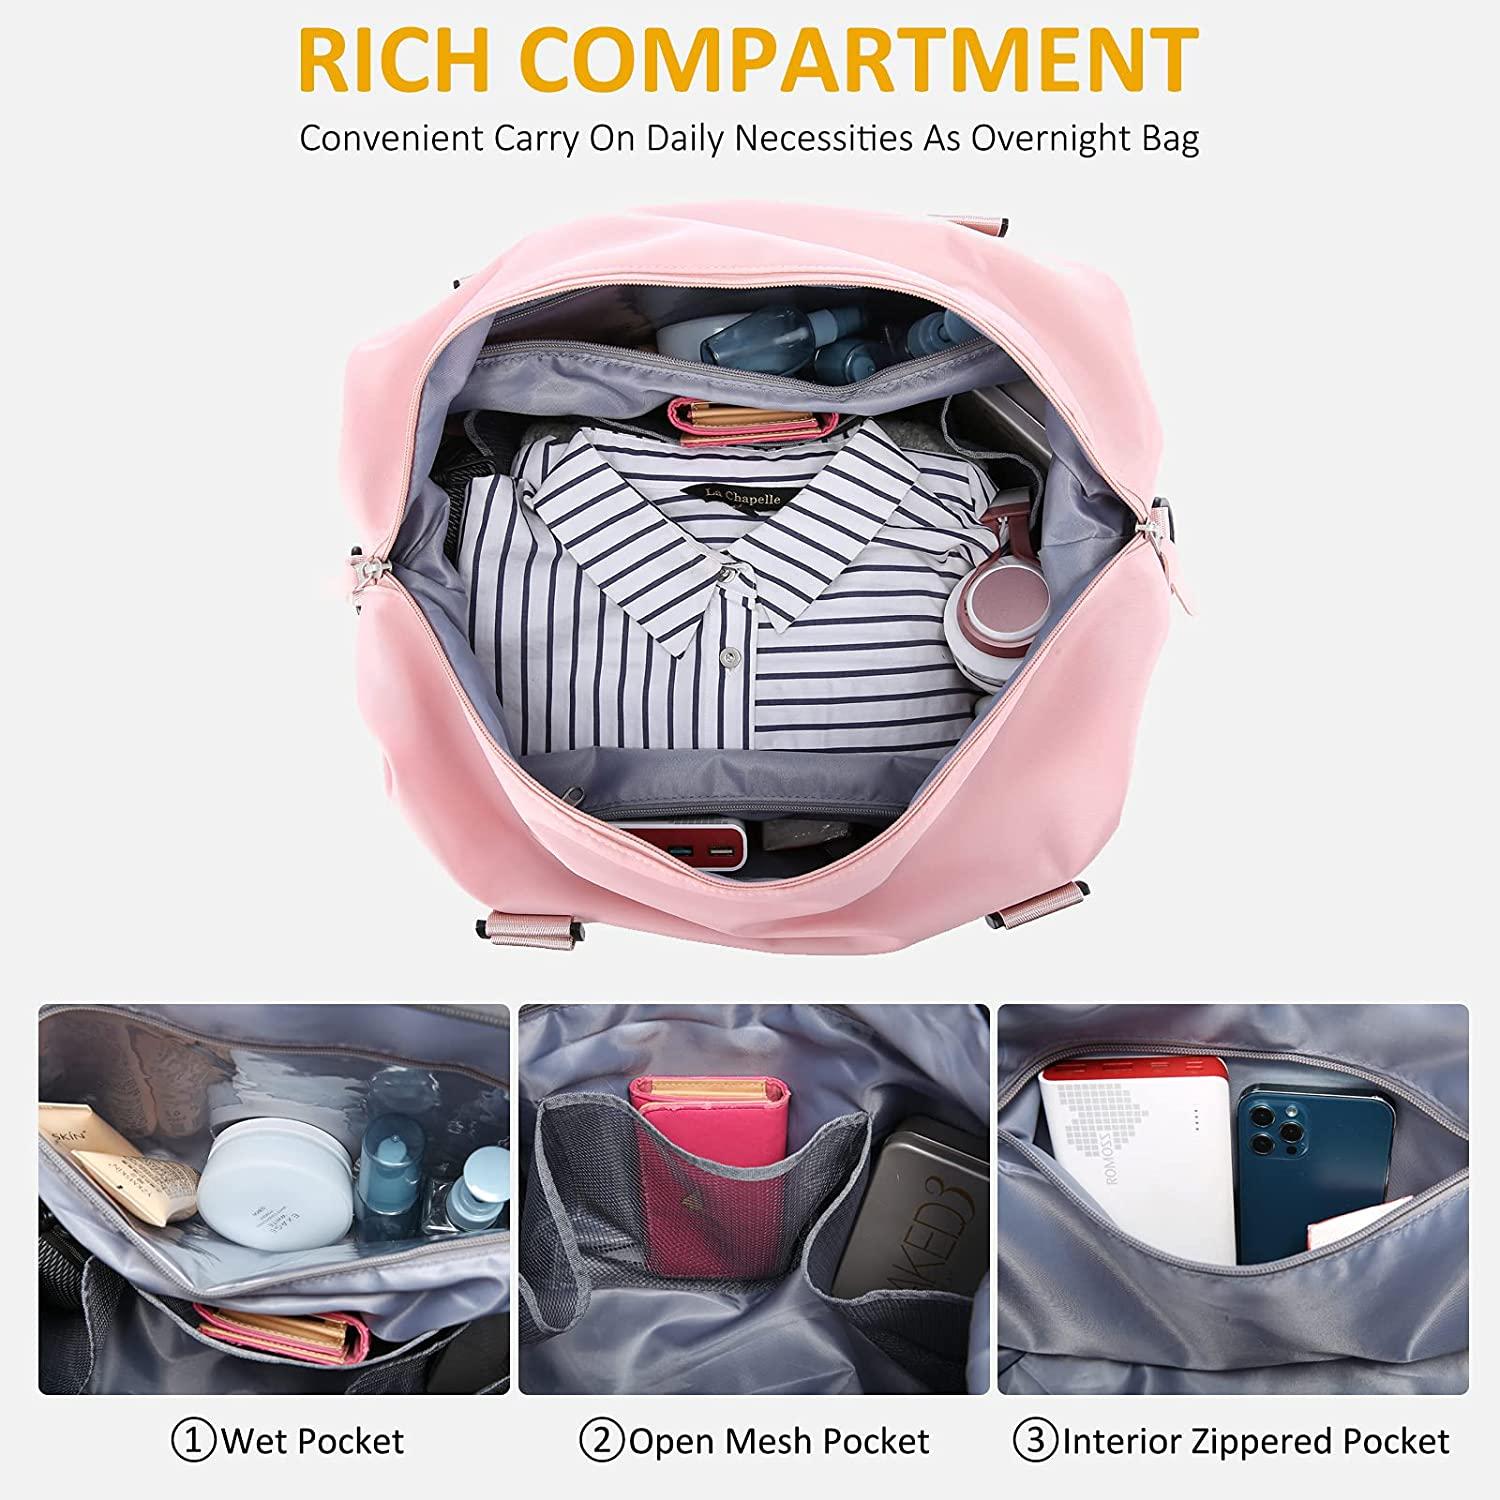 Aueoeo Weekender Bag for Women, Cute Travel Tote Bag Gym, Duffel Bag with  Toiletry Bag Carry On Bag, Overnight Bag with Wet Pocket, Hospital Bag for